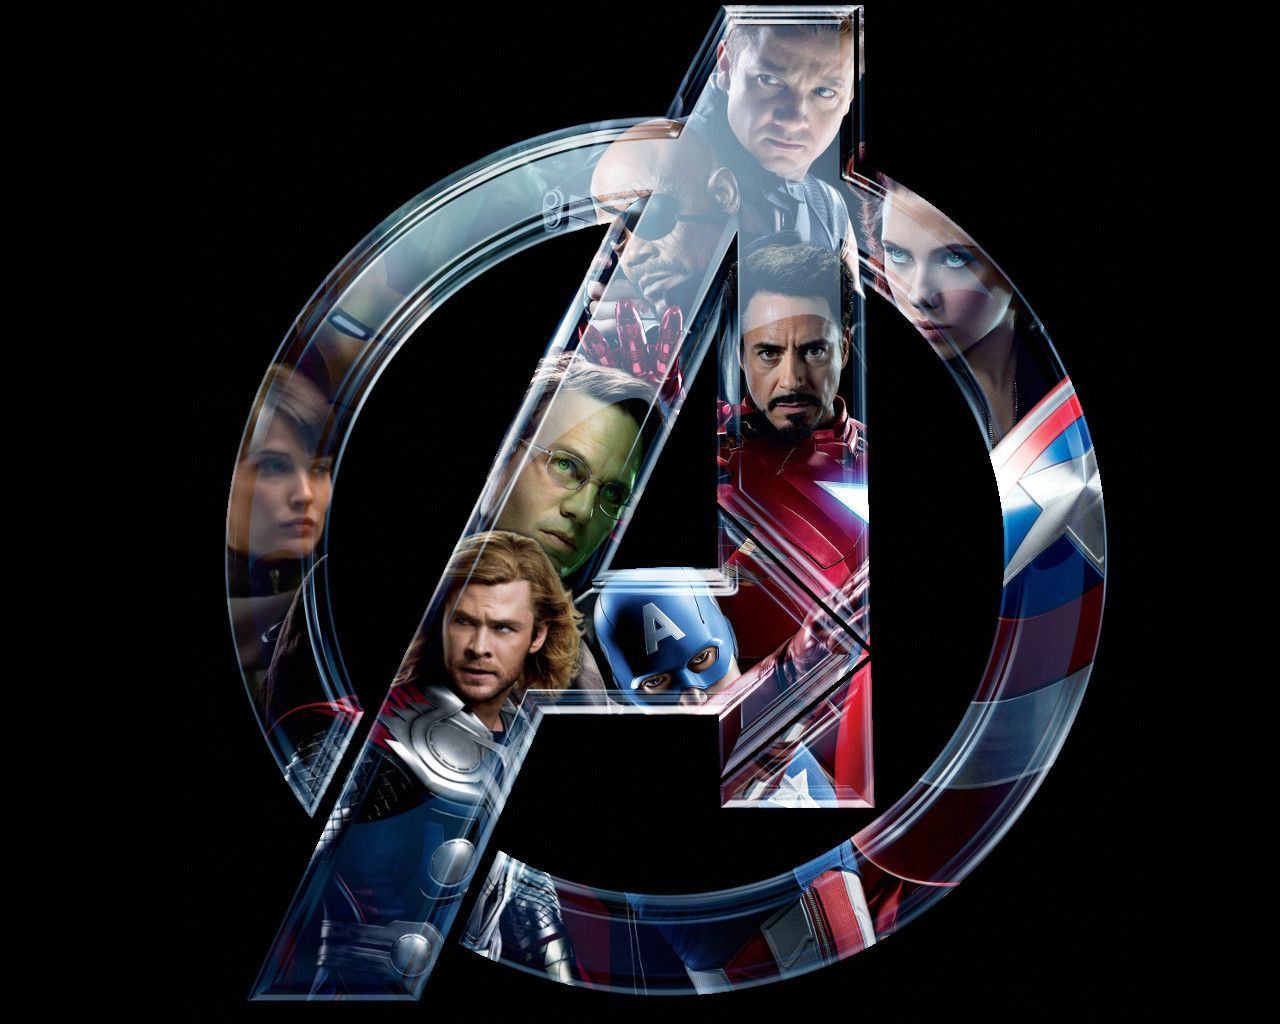 Avengers Wallpaper, Background, Image, Picture. Design Trends PSD, Vector Downloads